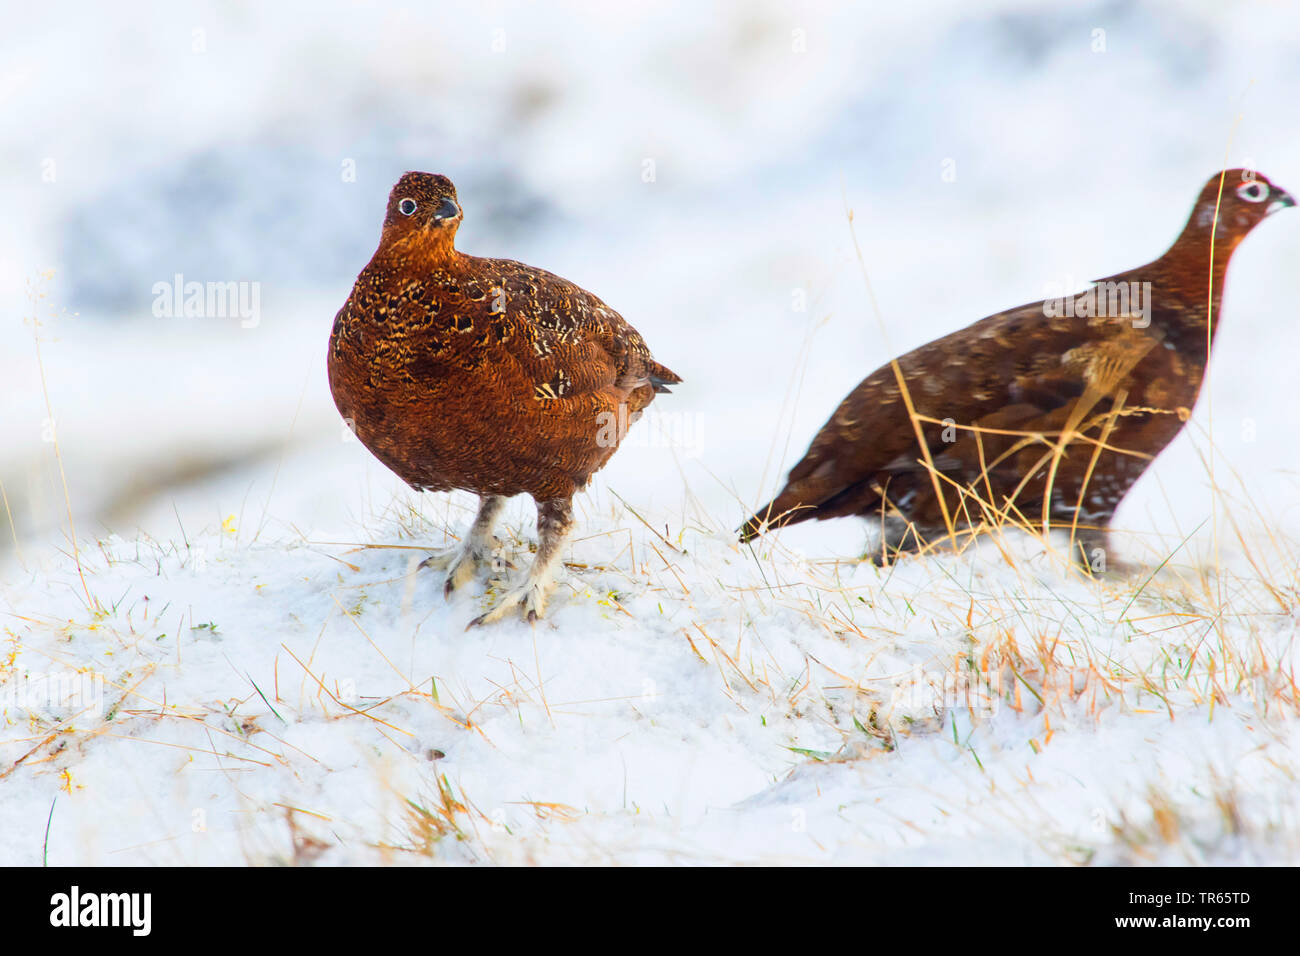 Red grouse (Lagopus lagopus scoticus), two red grouses in wintry surrounding in the snow, United Kingdom, Scotland, Cairngorms National Park, Aviemore Stock Photo